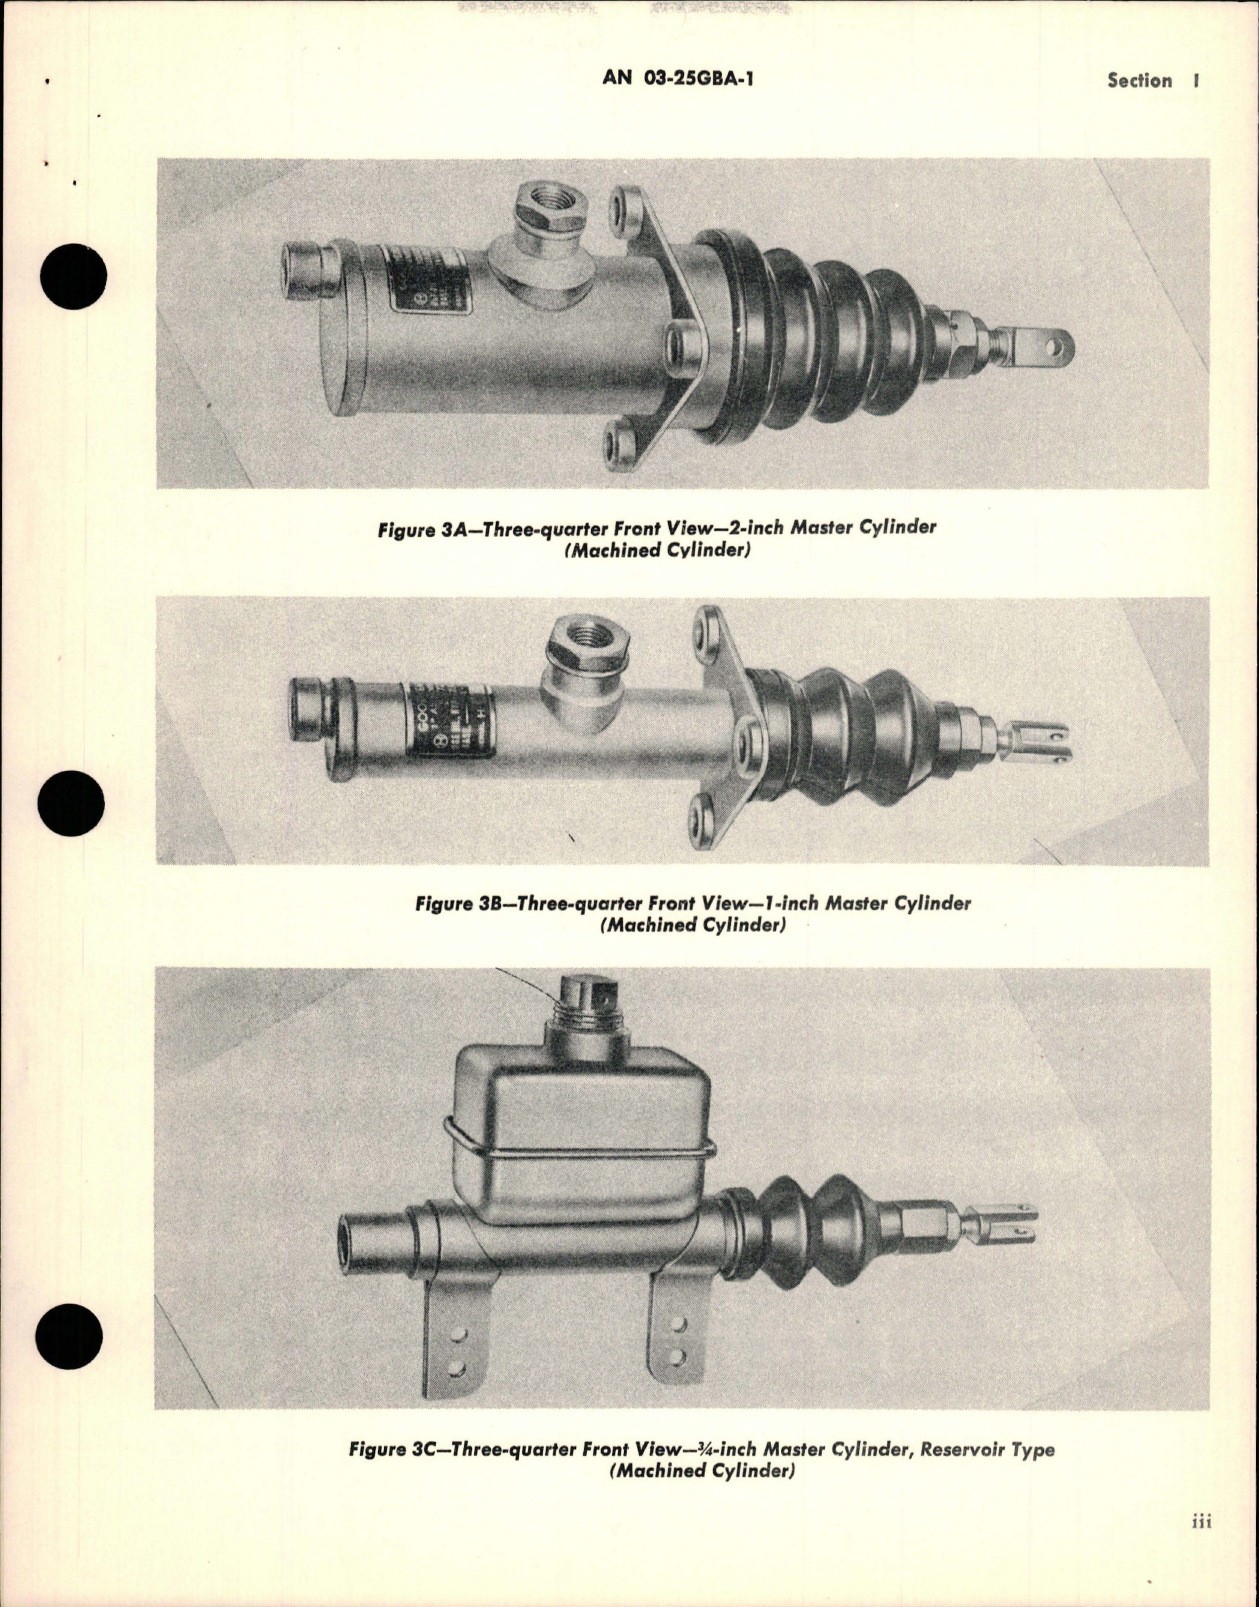 Sample page 5 from AirCorps Library document: Operation, Service and Overhaul Instructions with Parts Catalog for Master Brake Cylinders